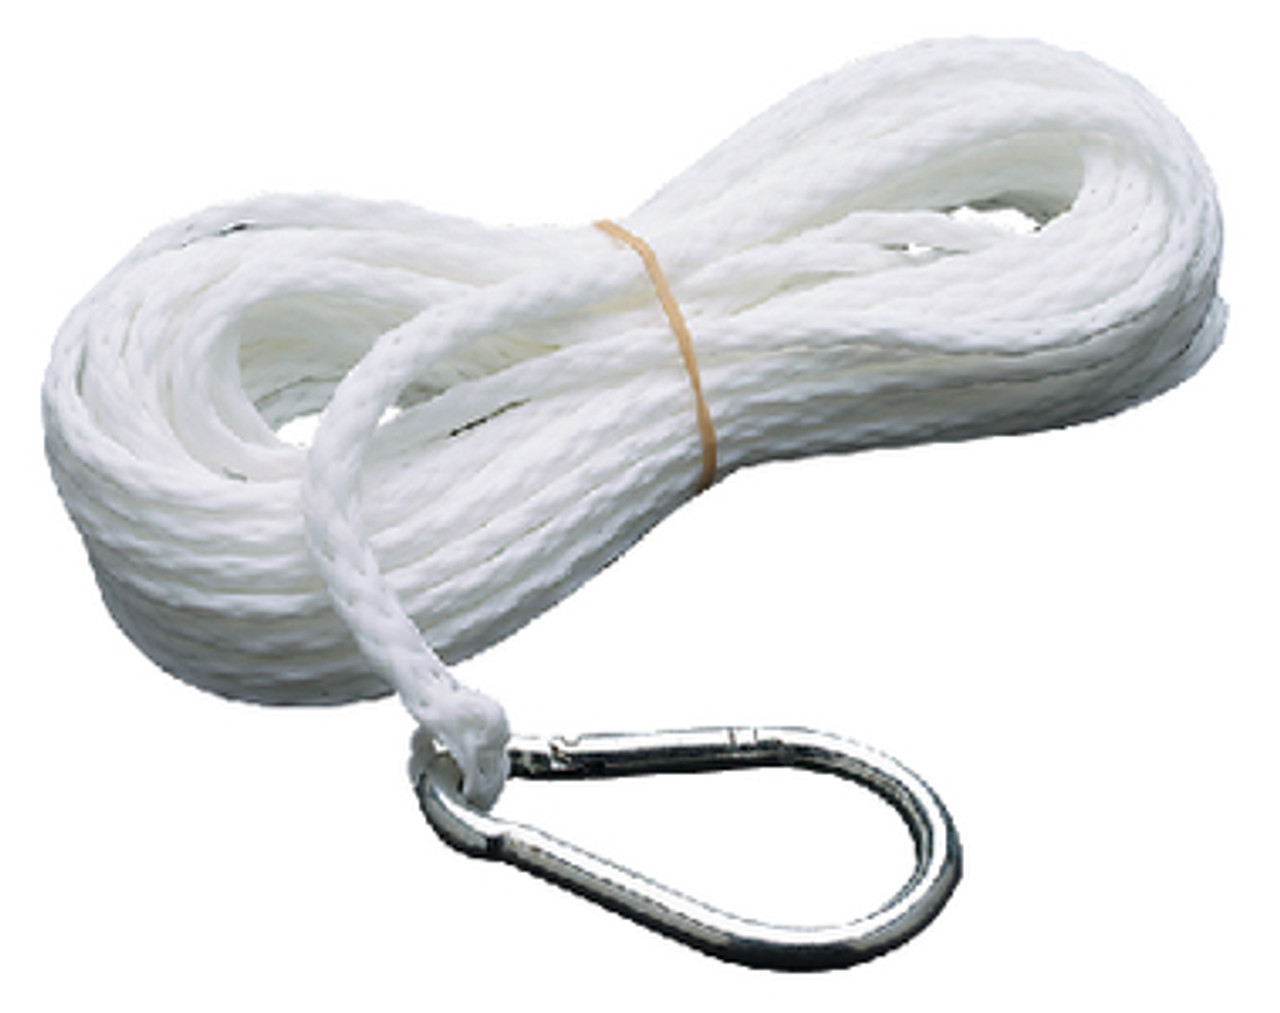 3/8 Inch x 75 Ft Hollow Braid Polypropylene Anchor Line with Hook for Boats  - White's Marine